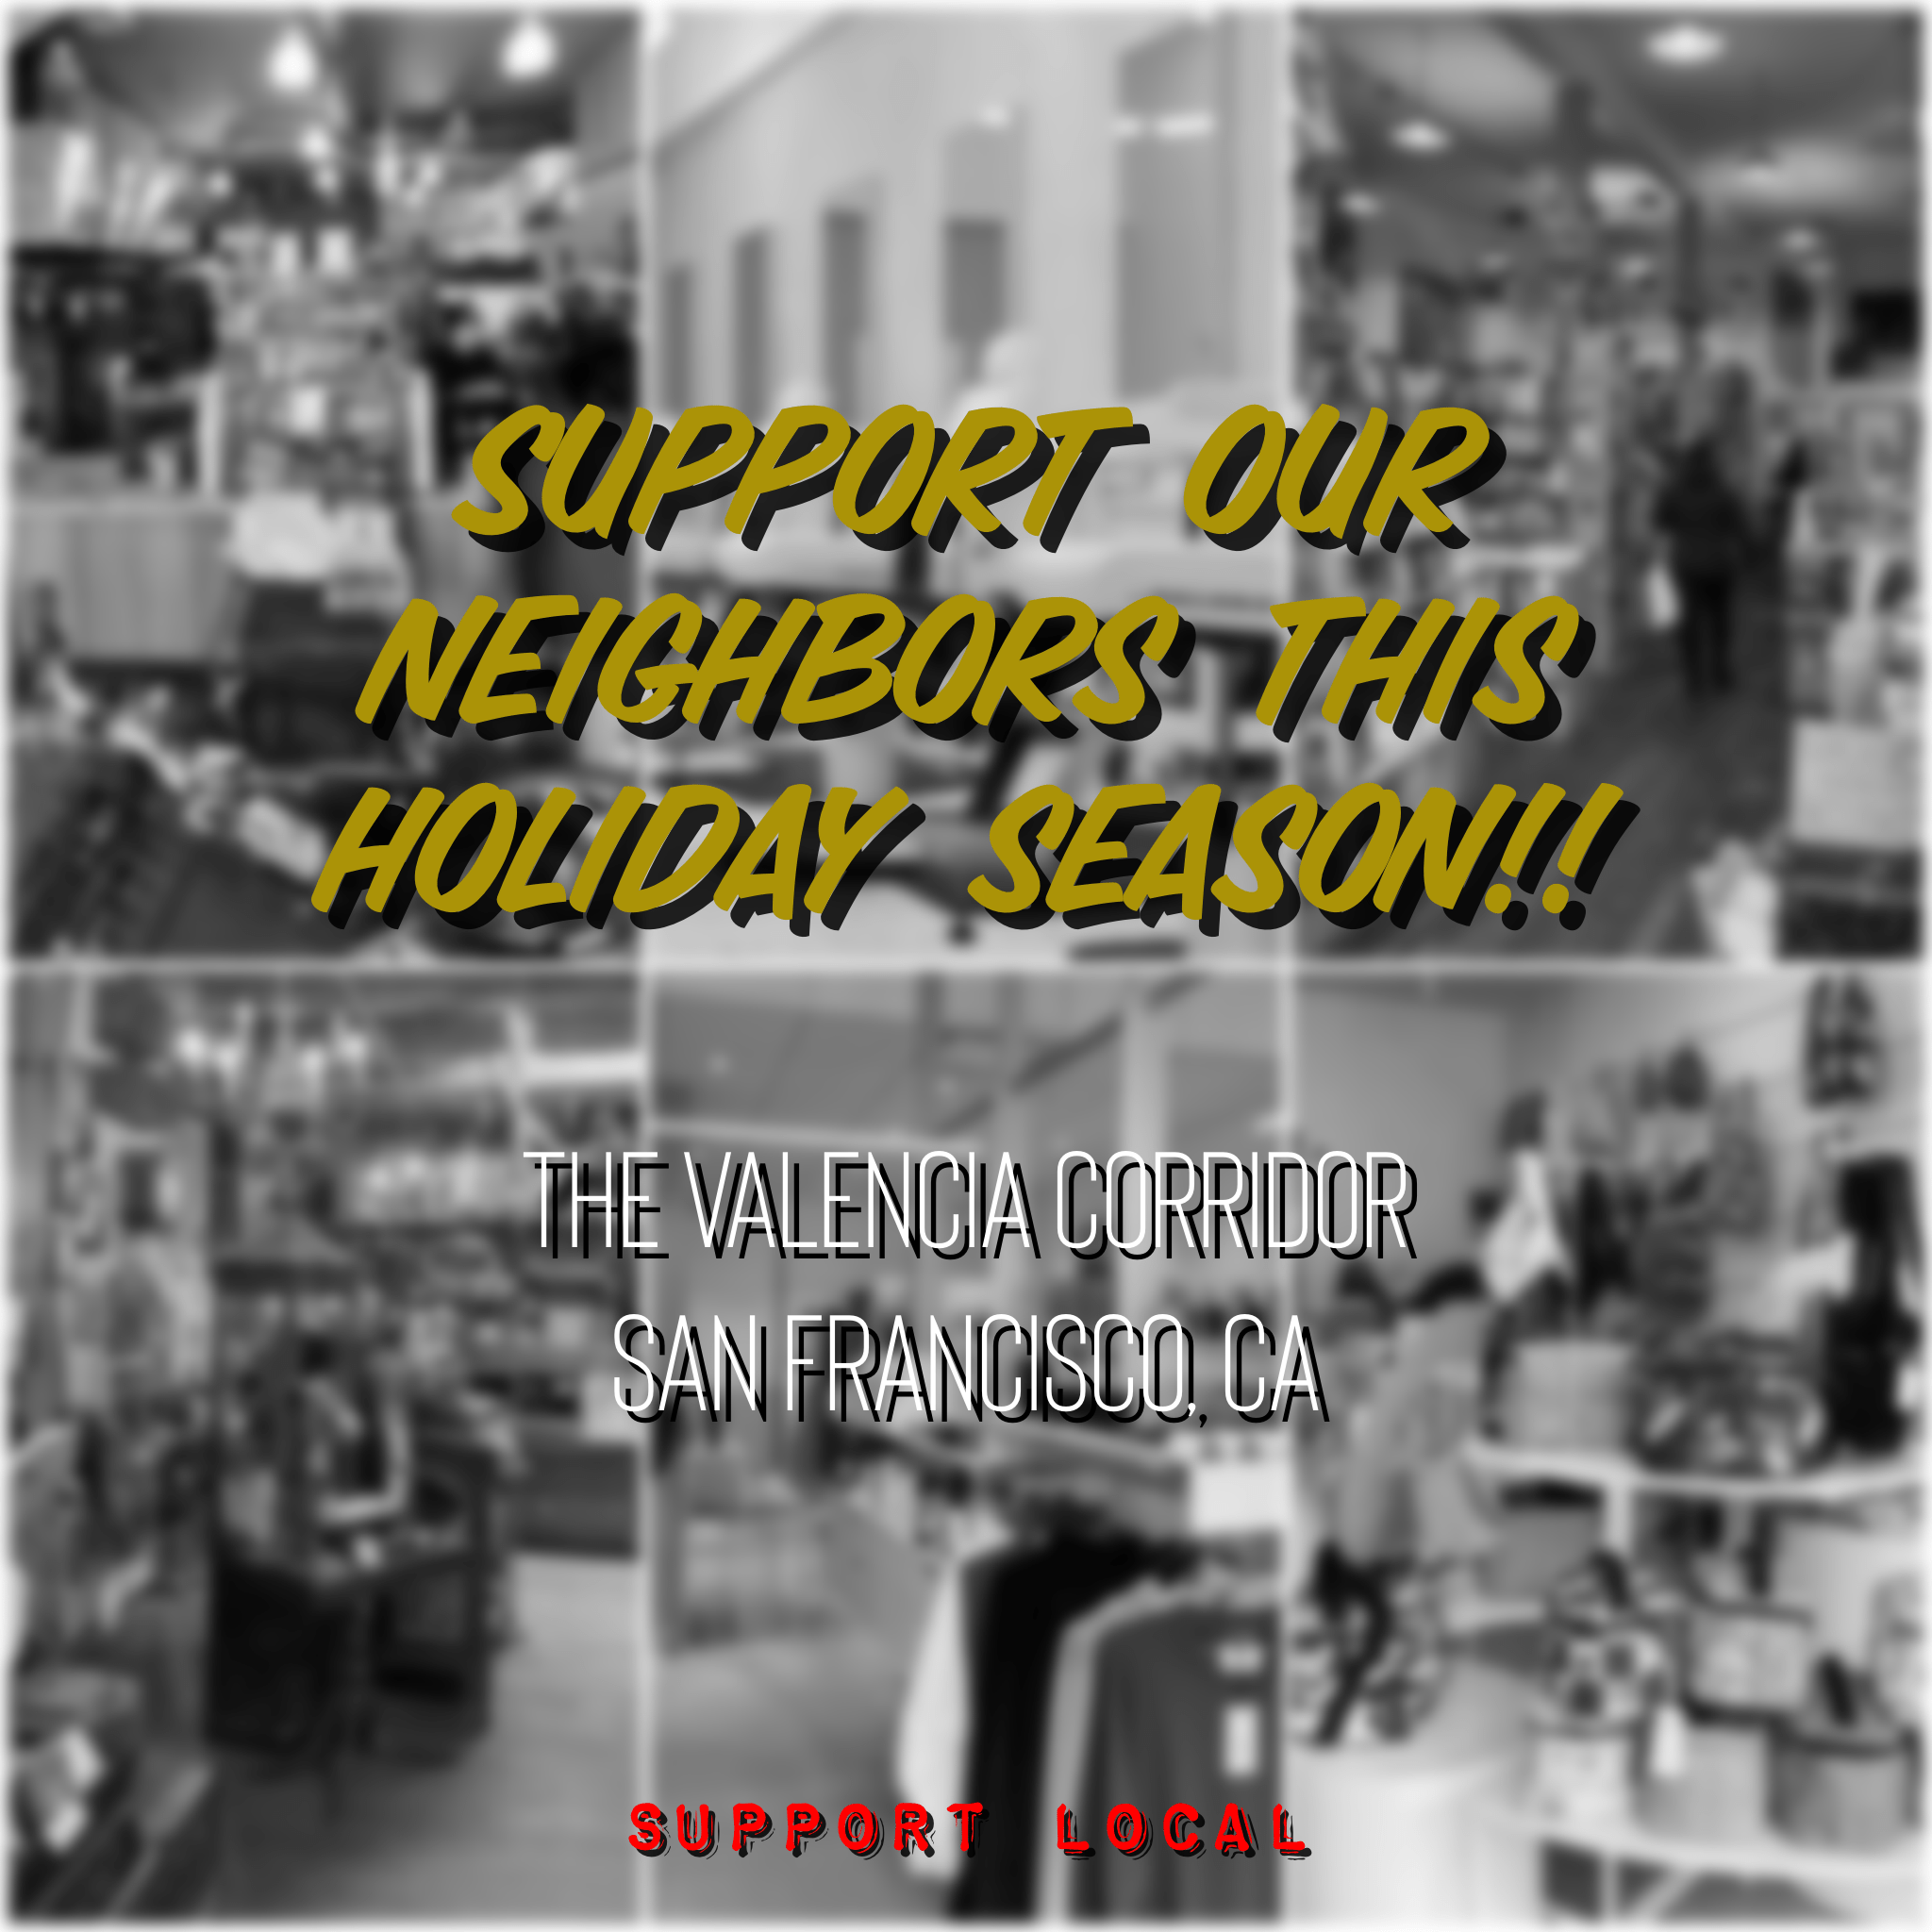 Support Our Neighboring Businesses This Holiday Season!